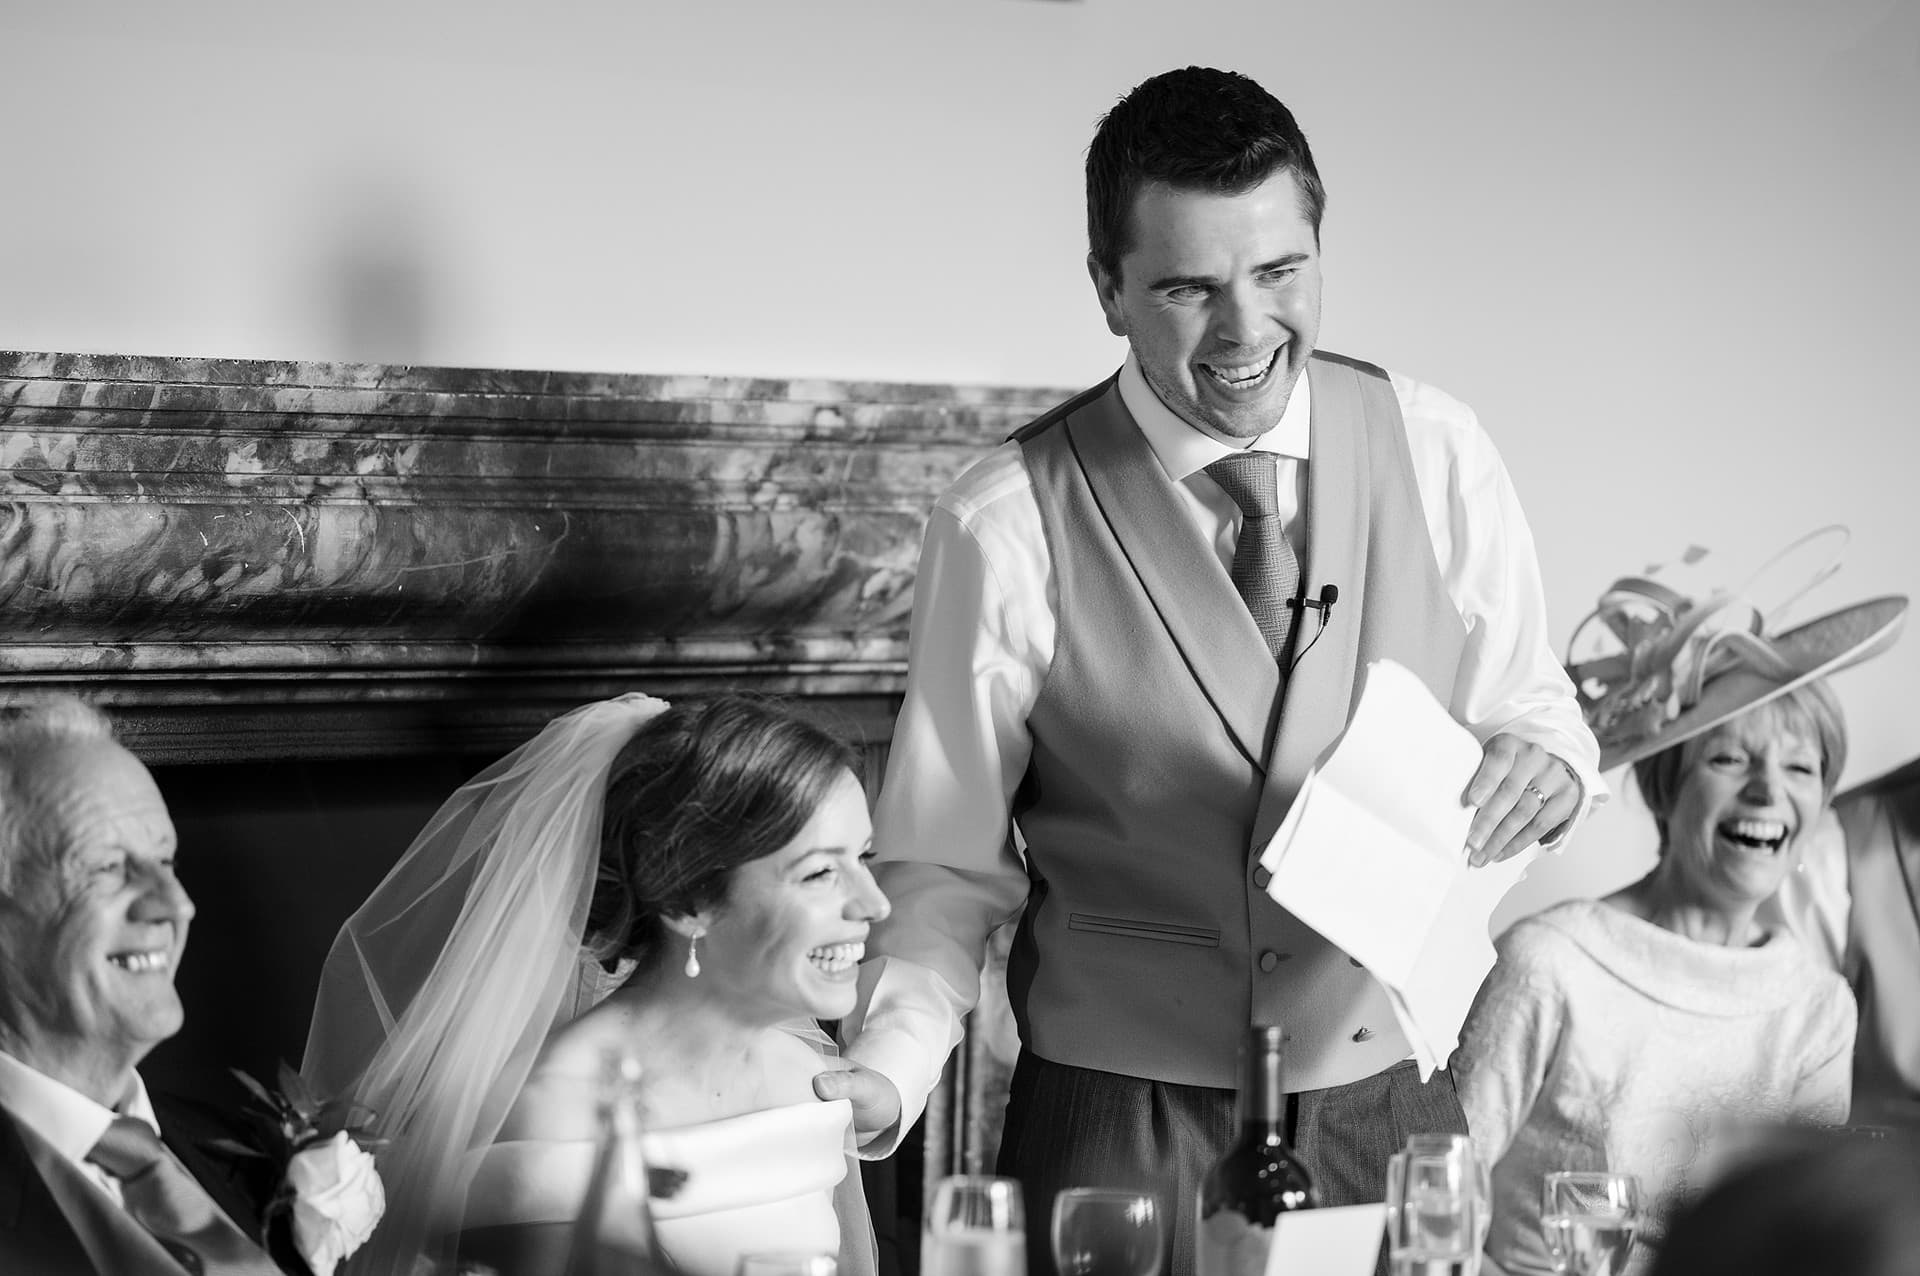 The groom laughing and reaching out to touch the bride's shoulder as he makes a mistake during his speech